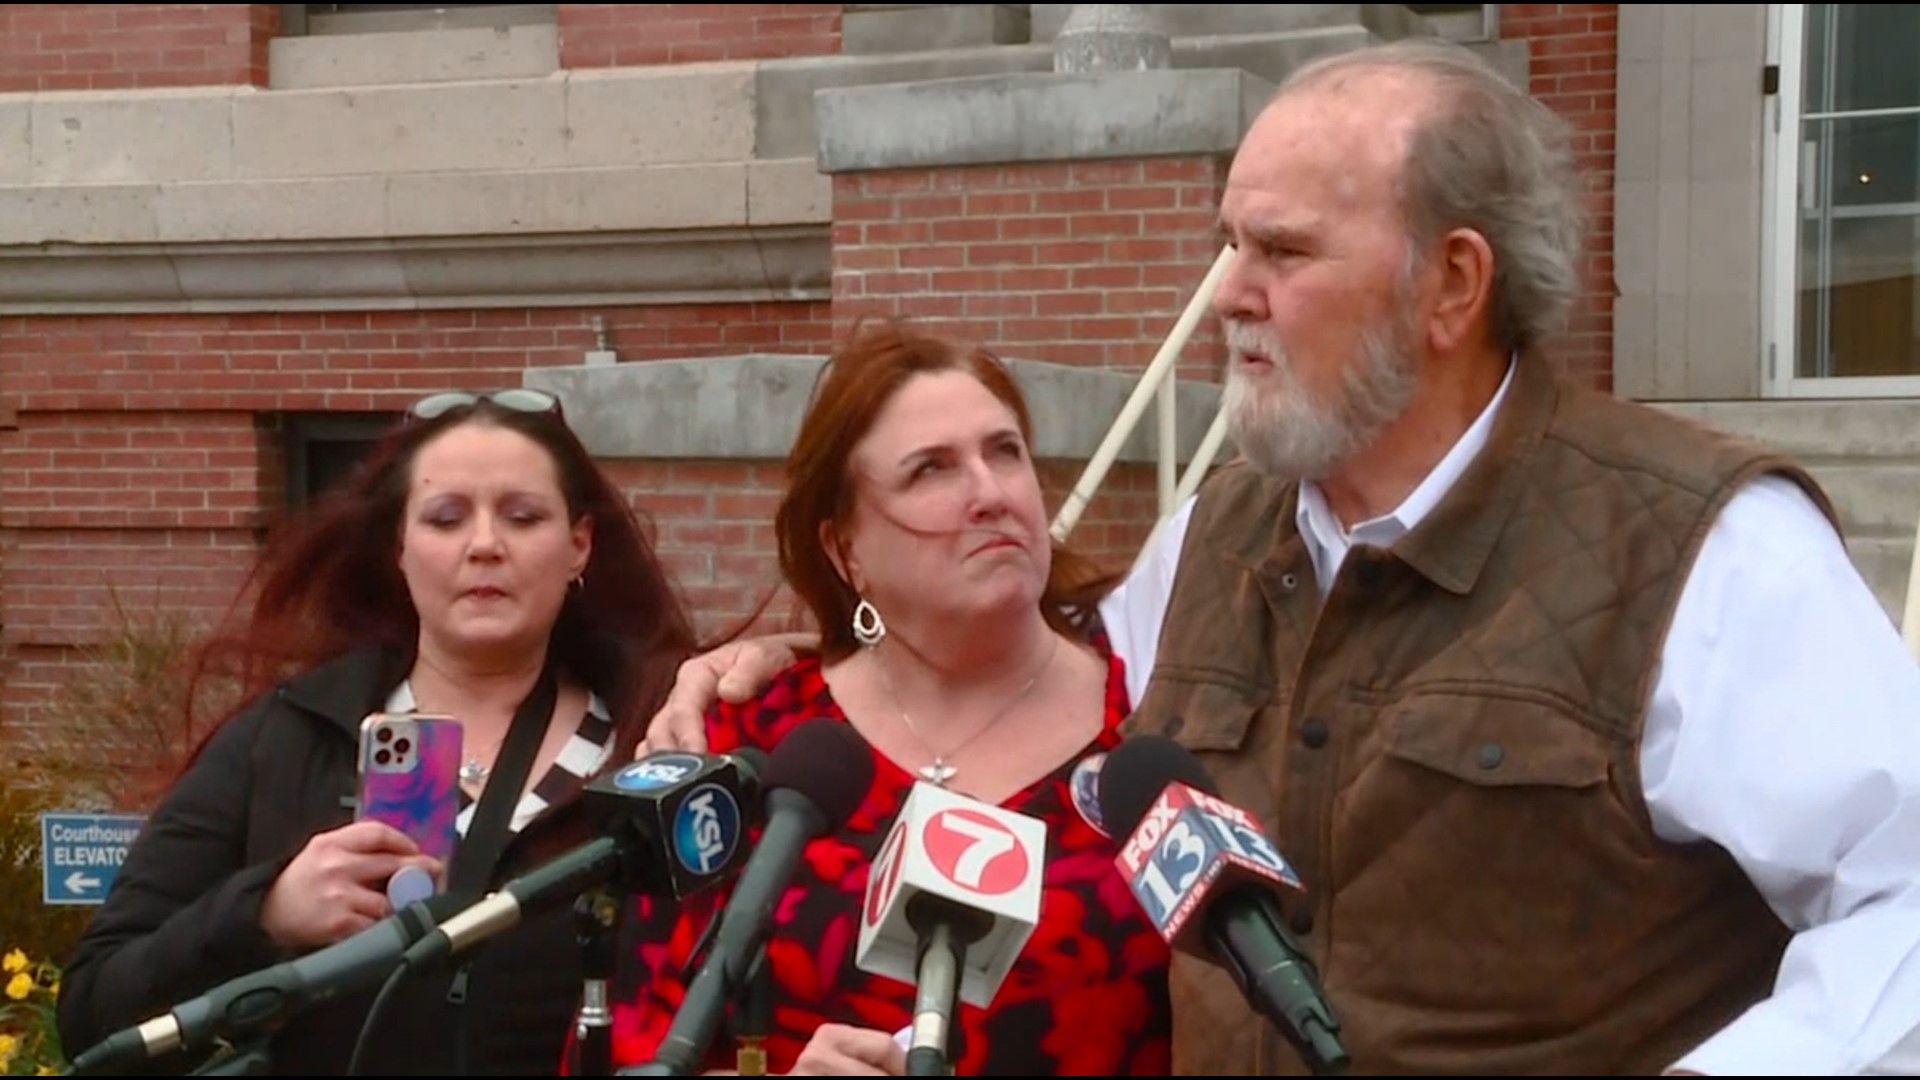 The grandparents of JJ Vallow spoke with the media after Lori Vallow's hearing Tuesday